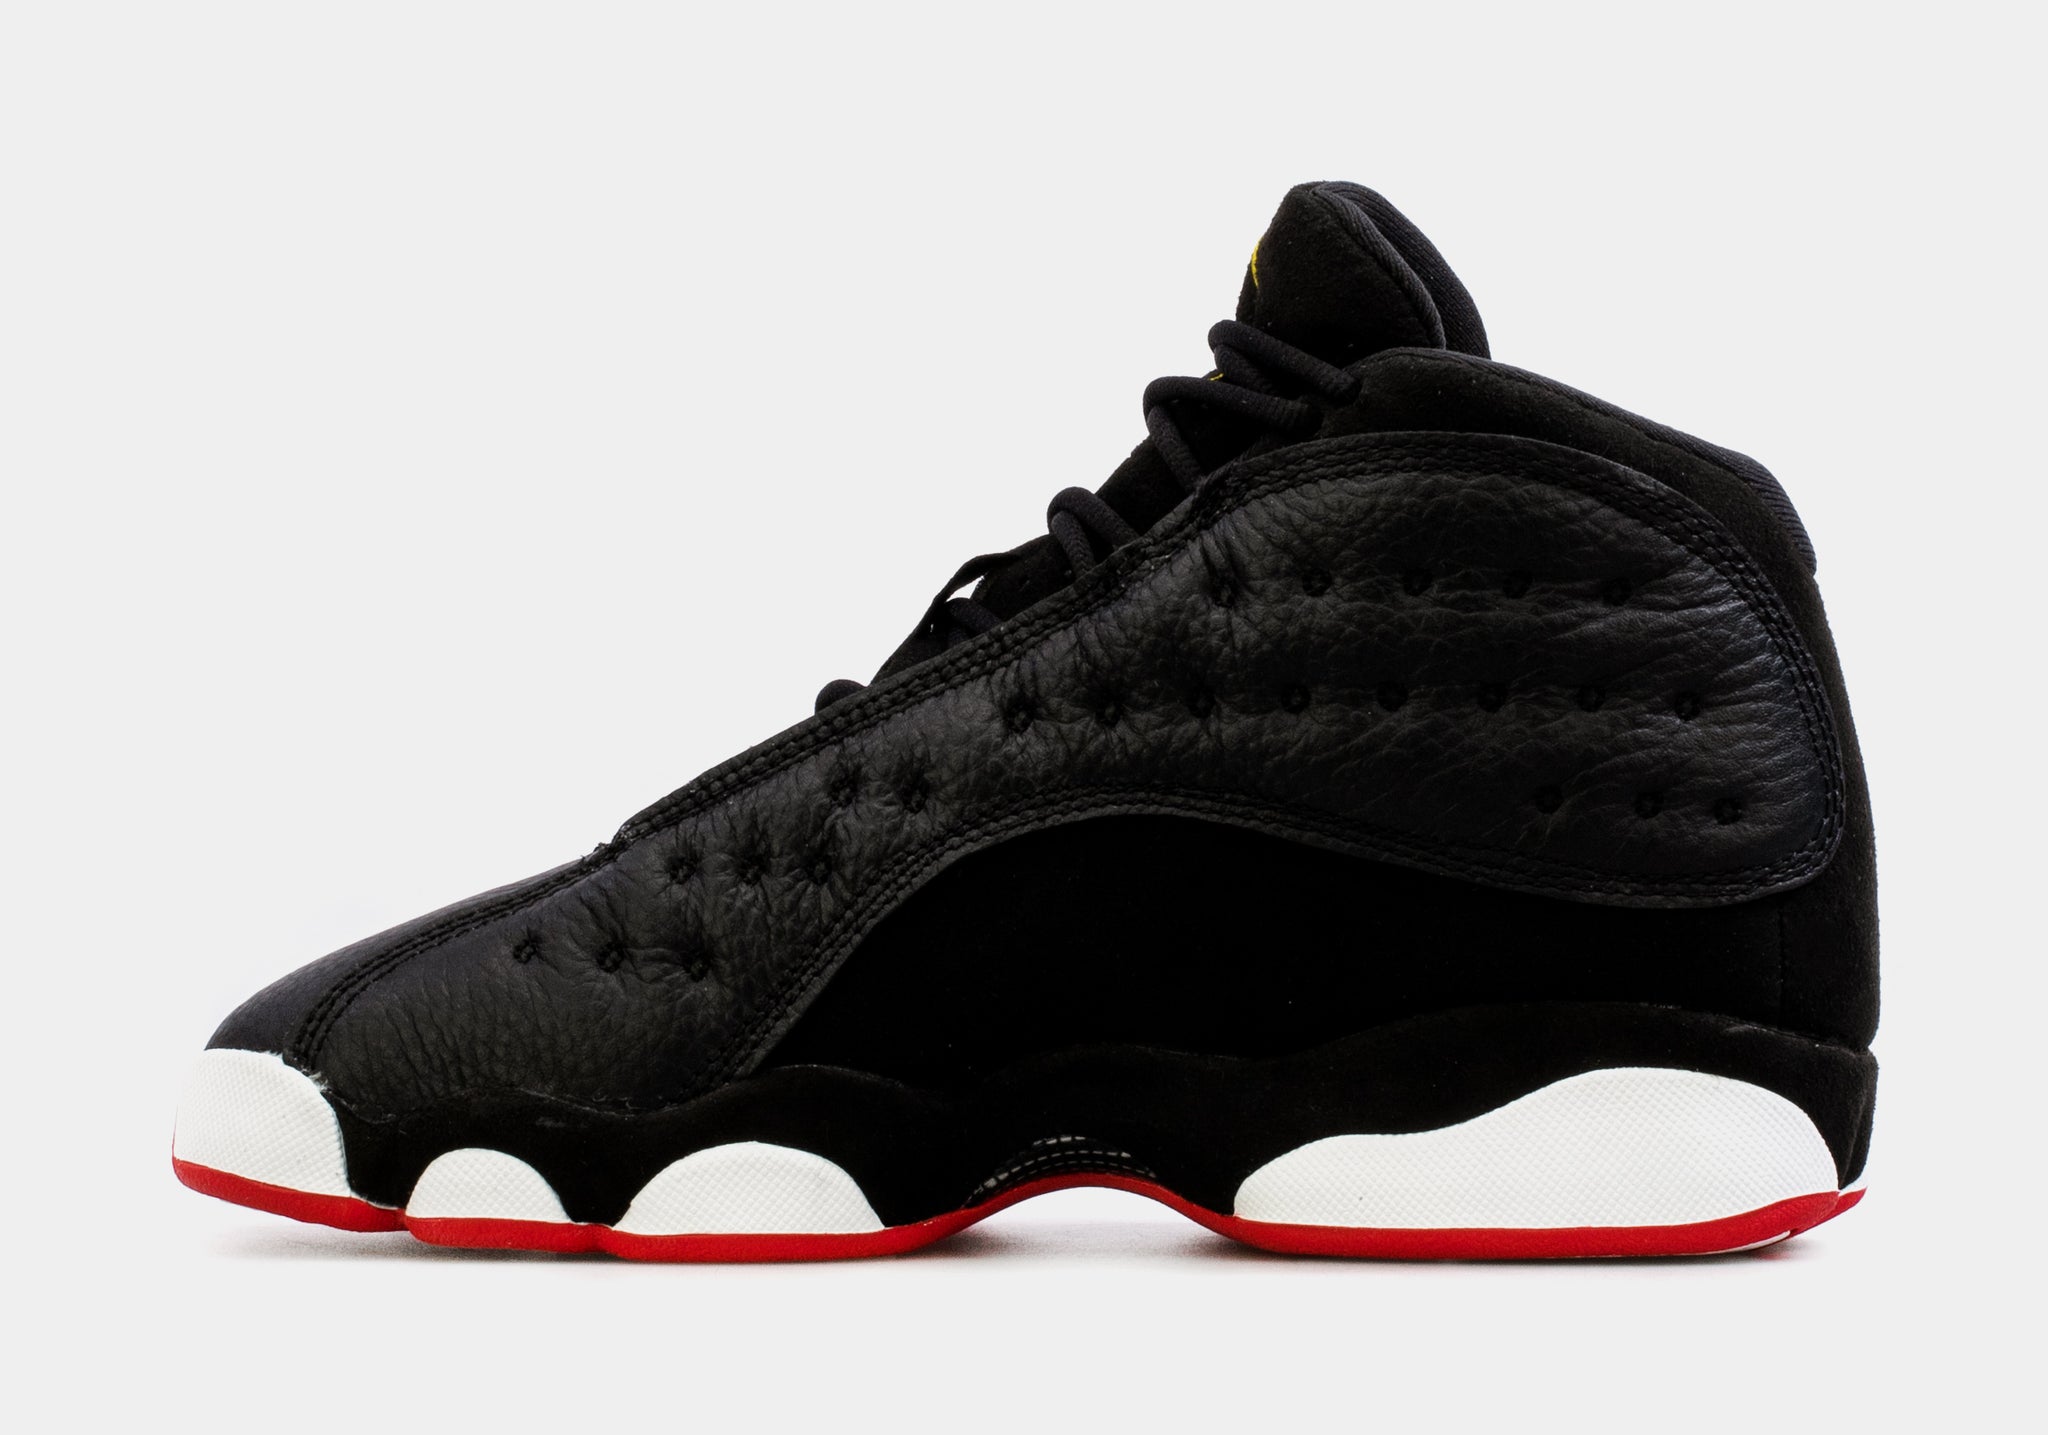 red and white jordan 13